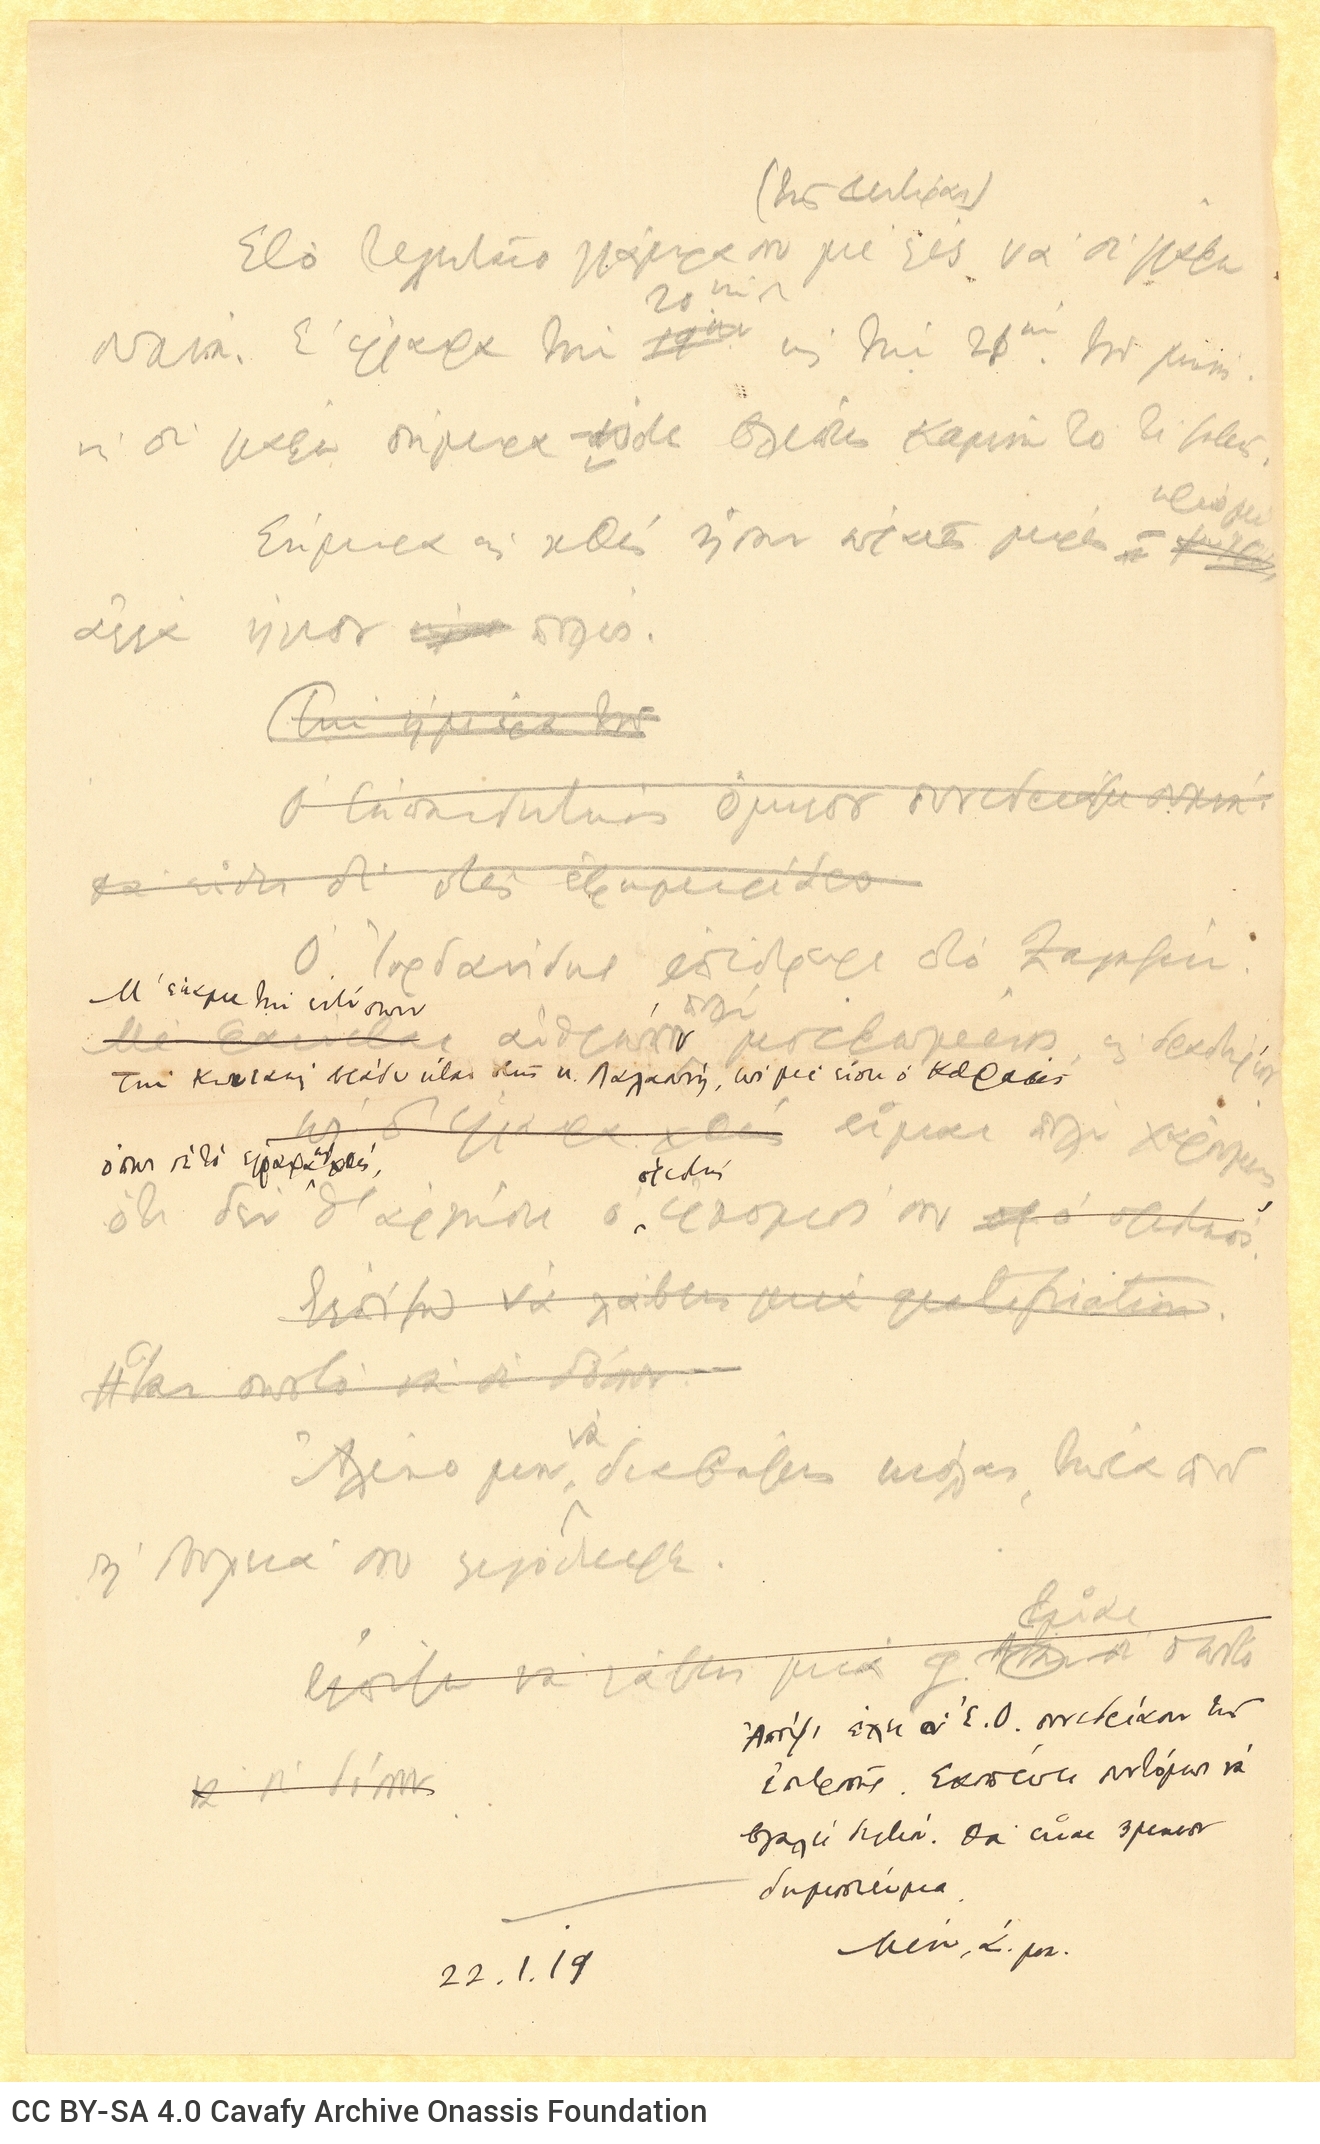 Handwritten draft letter by Cavafy to Alekos [Singopoulo] on one side of a sheet. Cancellations. Blank verso. The poet refers